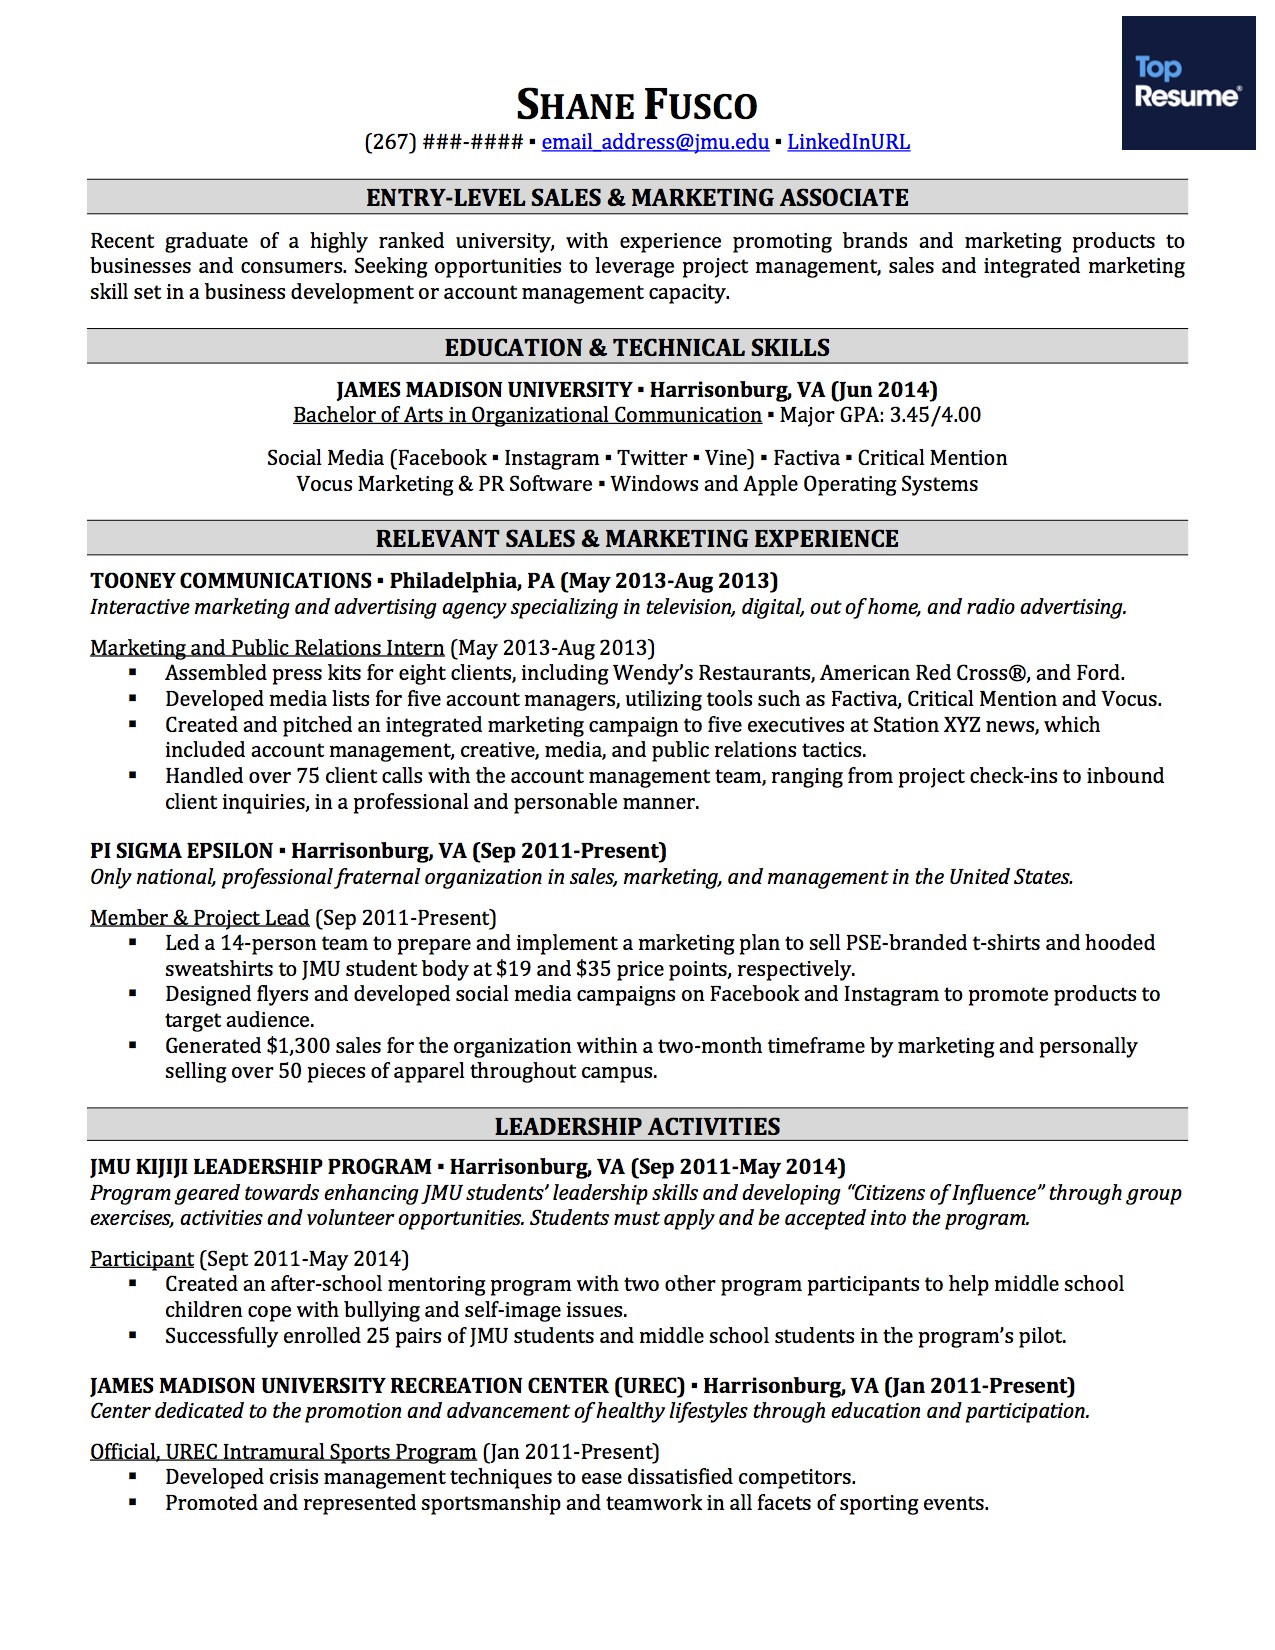 Sample Resume for Internship No Experience How to Write A Resume with No Experience topresume